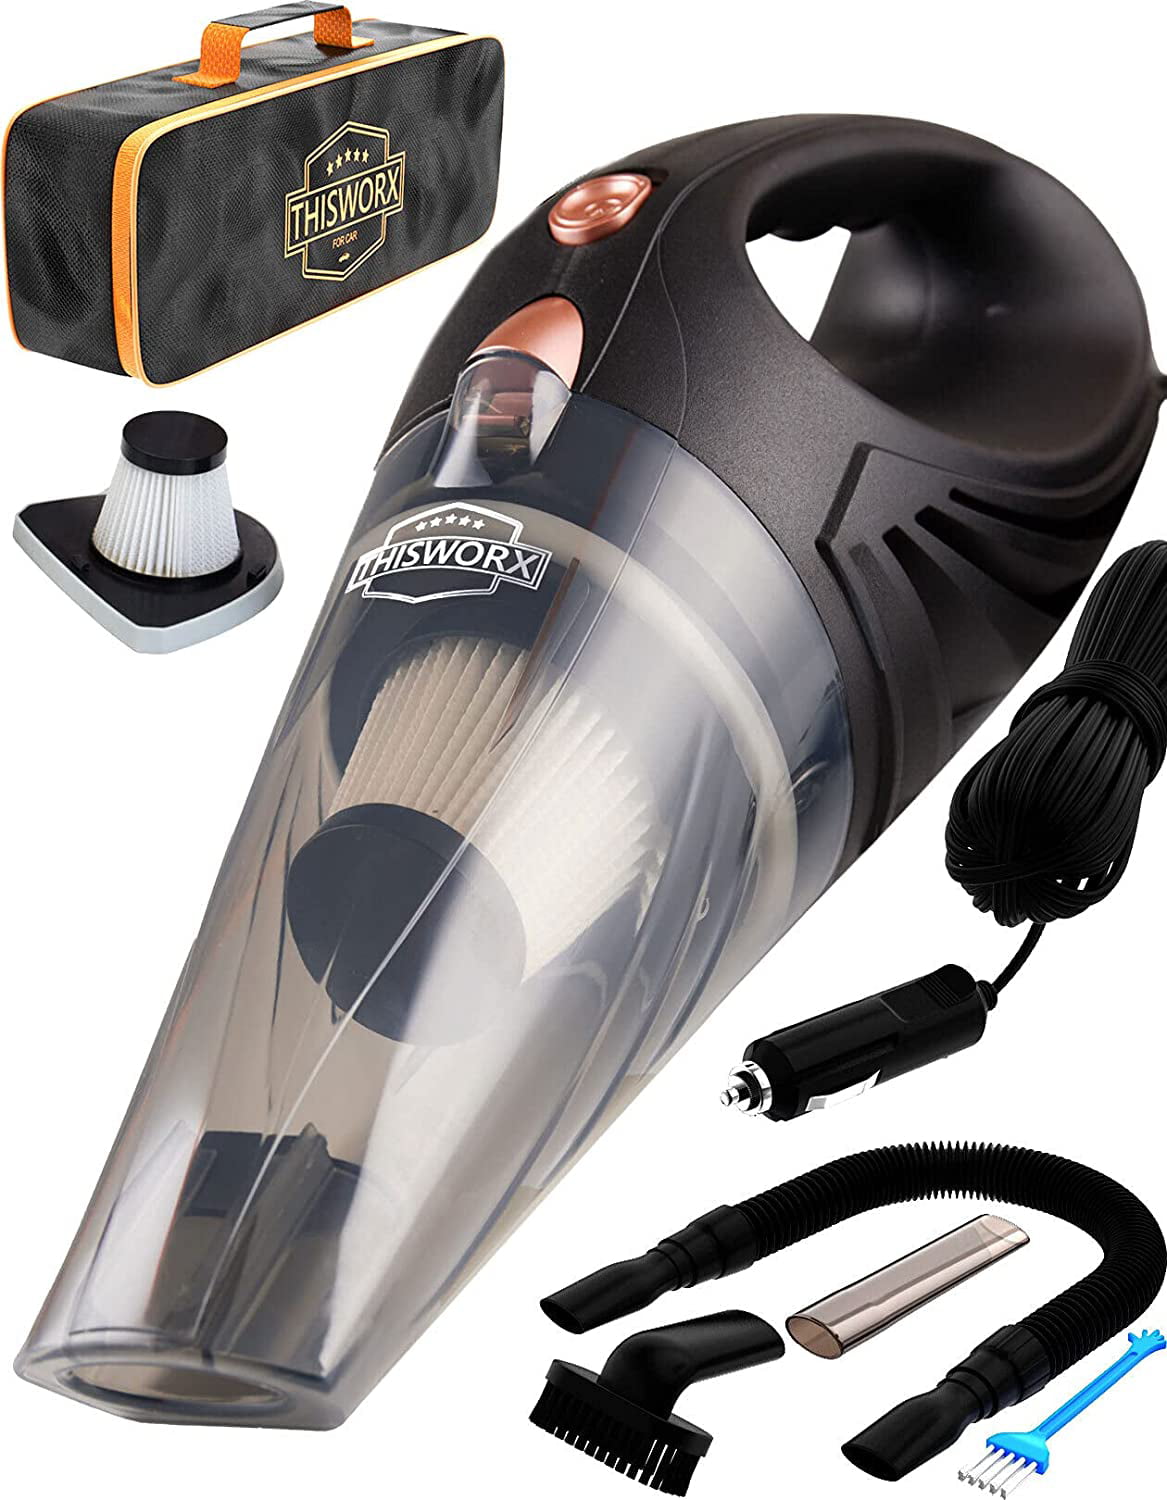 Photo 1 of ***FOR CARS ONLY - SEE NOTES***
ThisWorx Portable Car Vacuum Cleaner w/ 16 Foot Cable - 12V (Black)